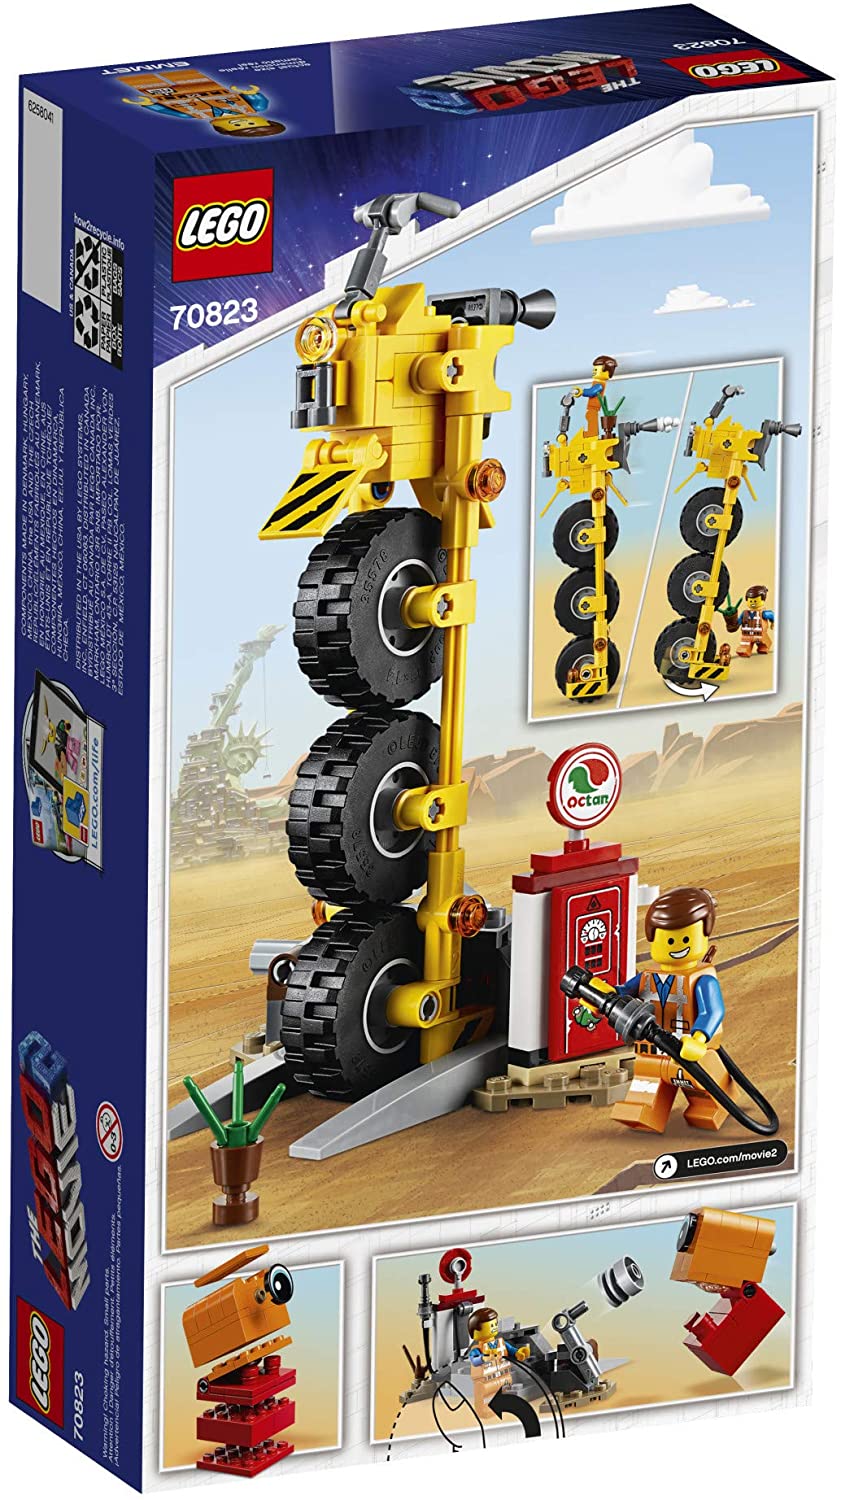 LEGO Aged 7 Plus The LEGO Movie 2 Emmets Thricycle Toy Of 174 Piece Sets